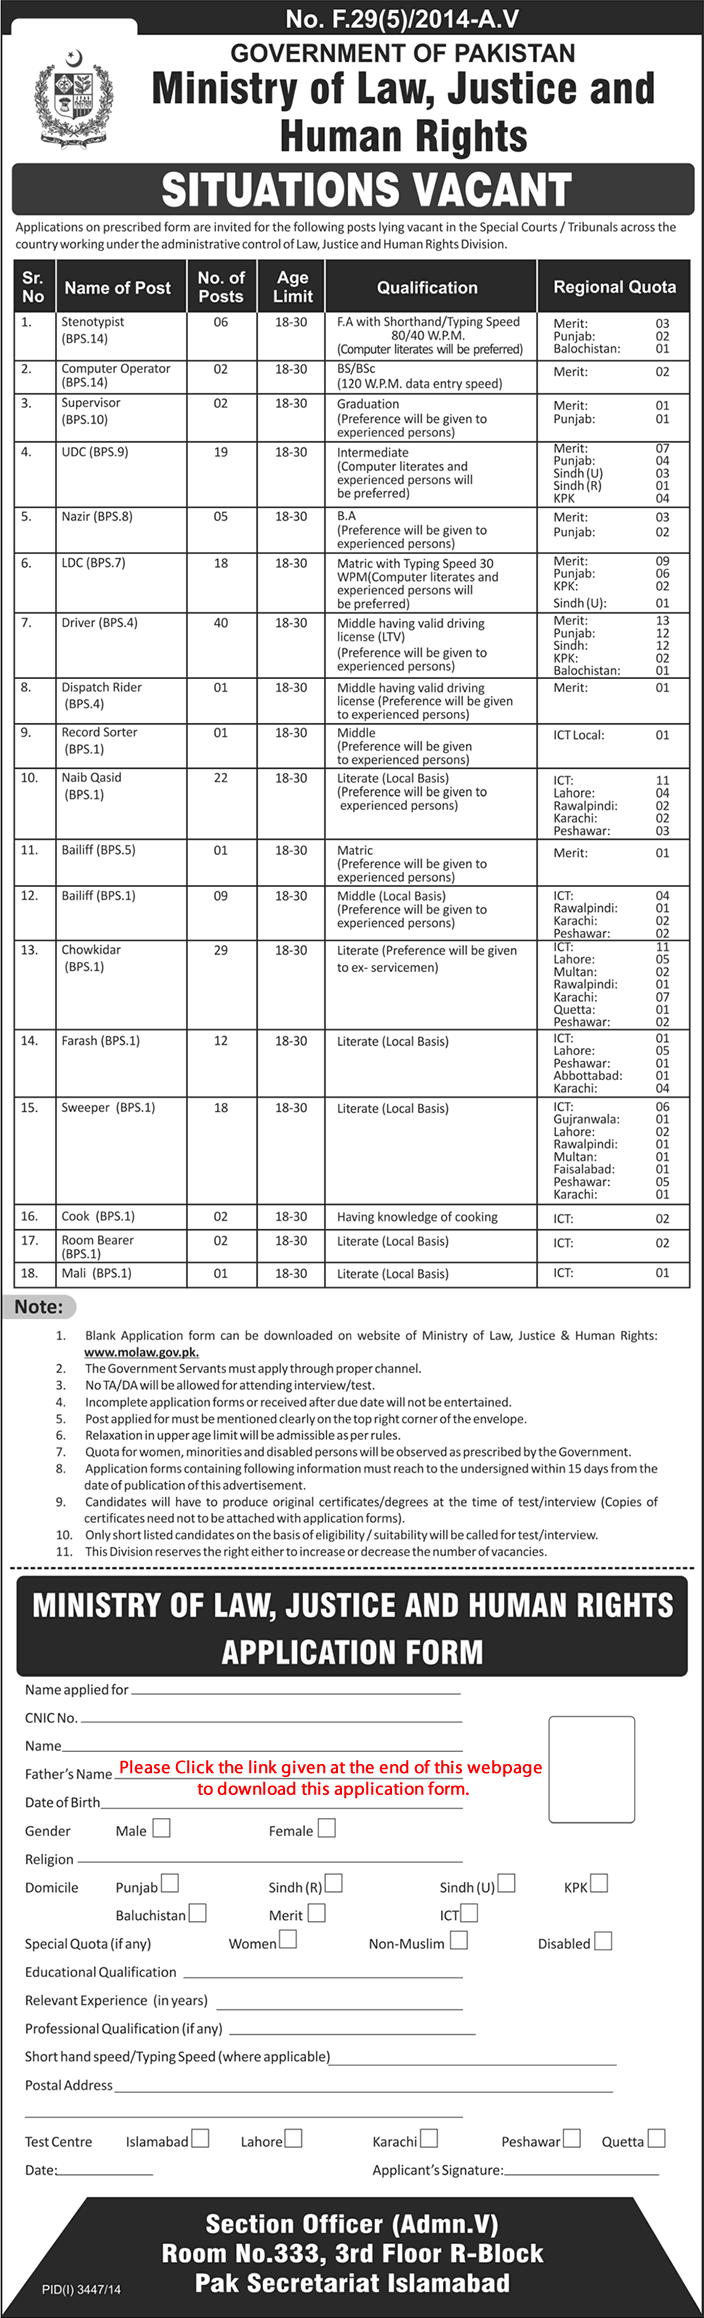 www.molaw.gov.pk Jobs Application Form 2015 Ministry of Law, Justice & Human Rights Latest